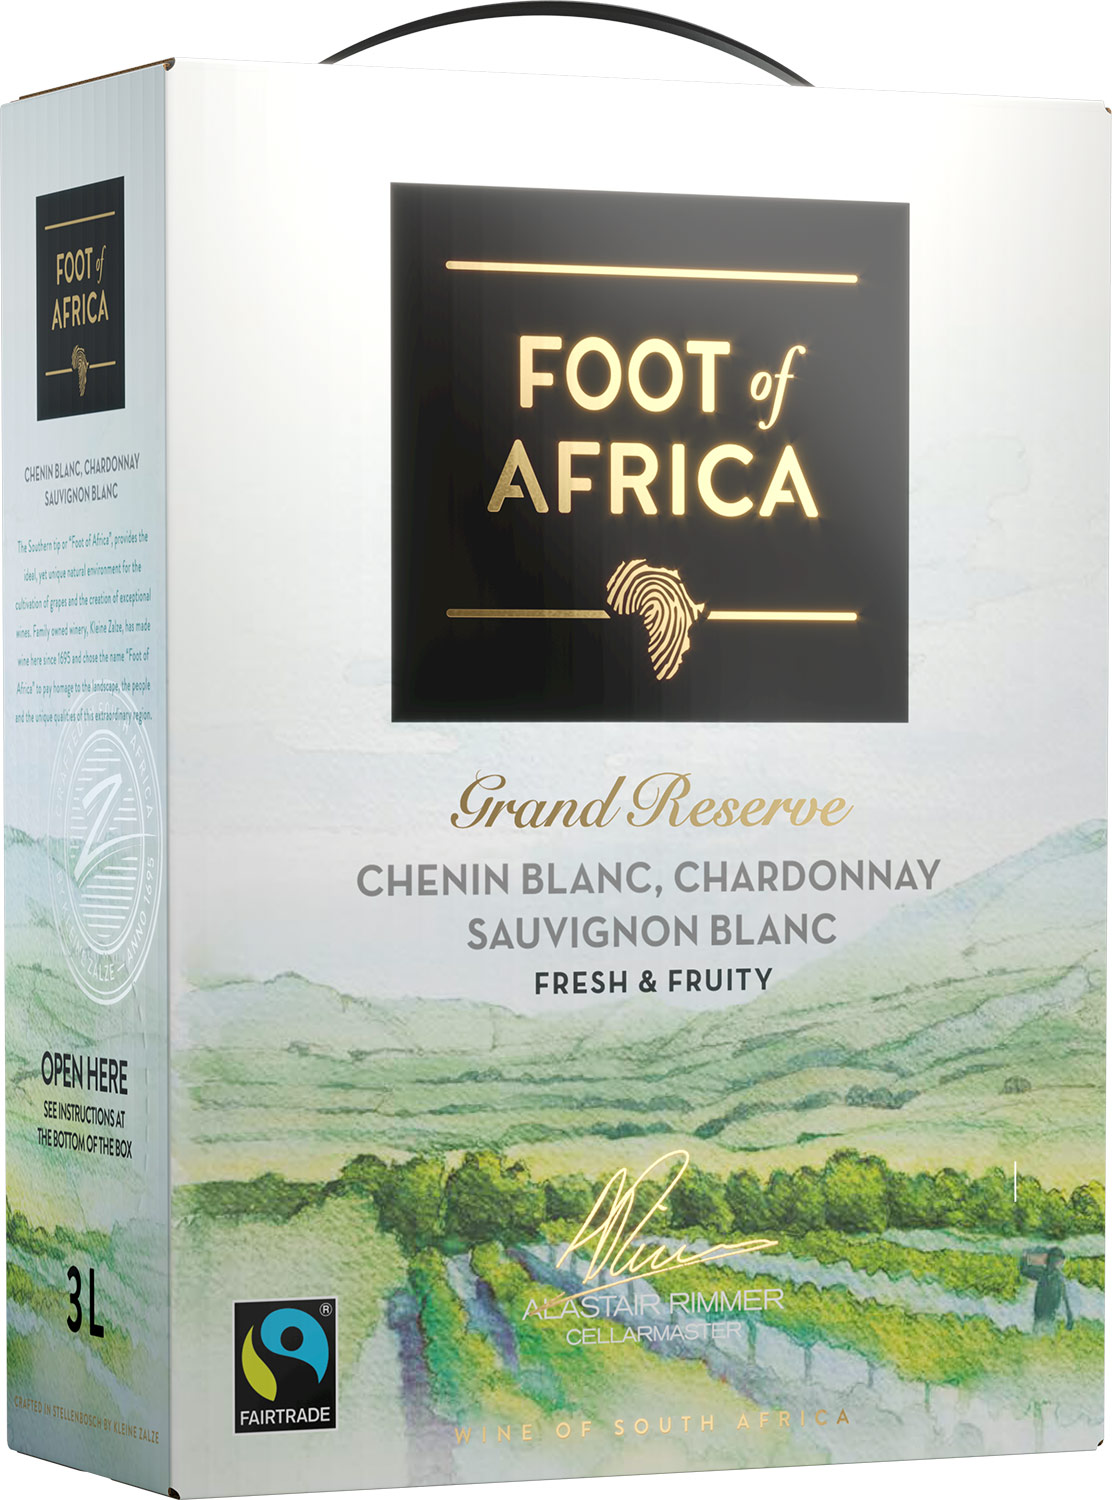 Foot of Africa Grand Reserve